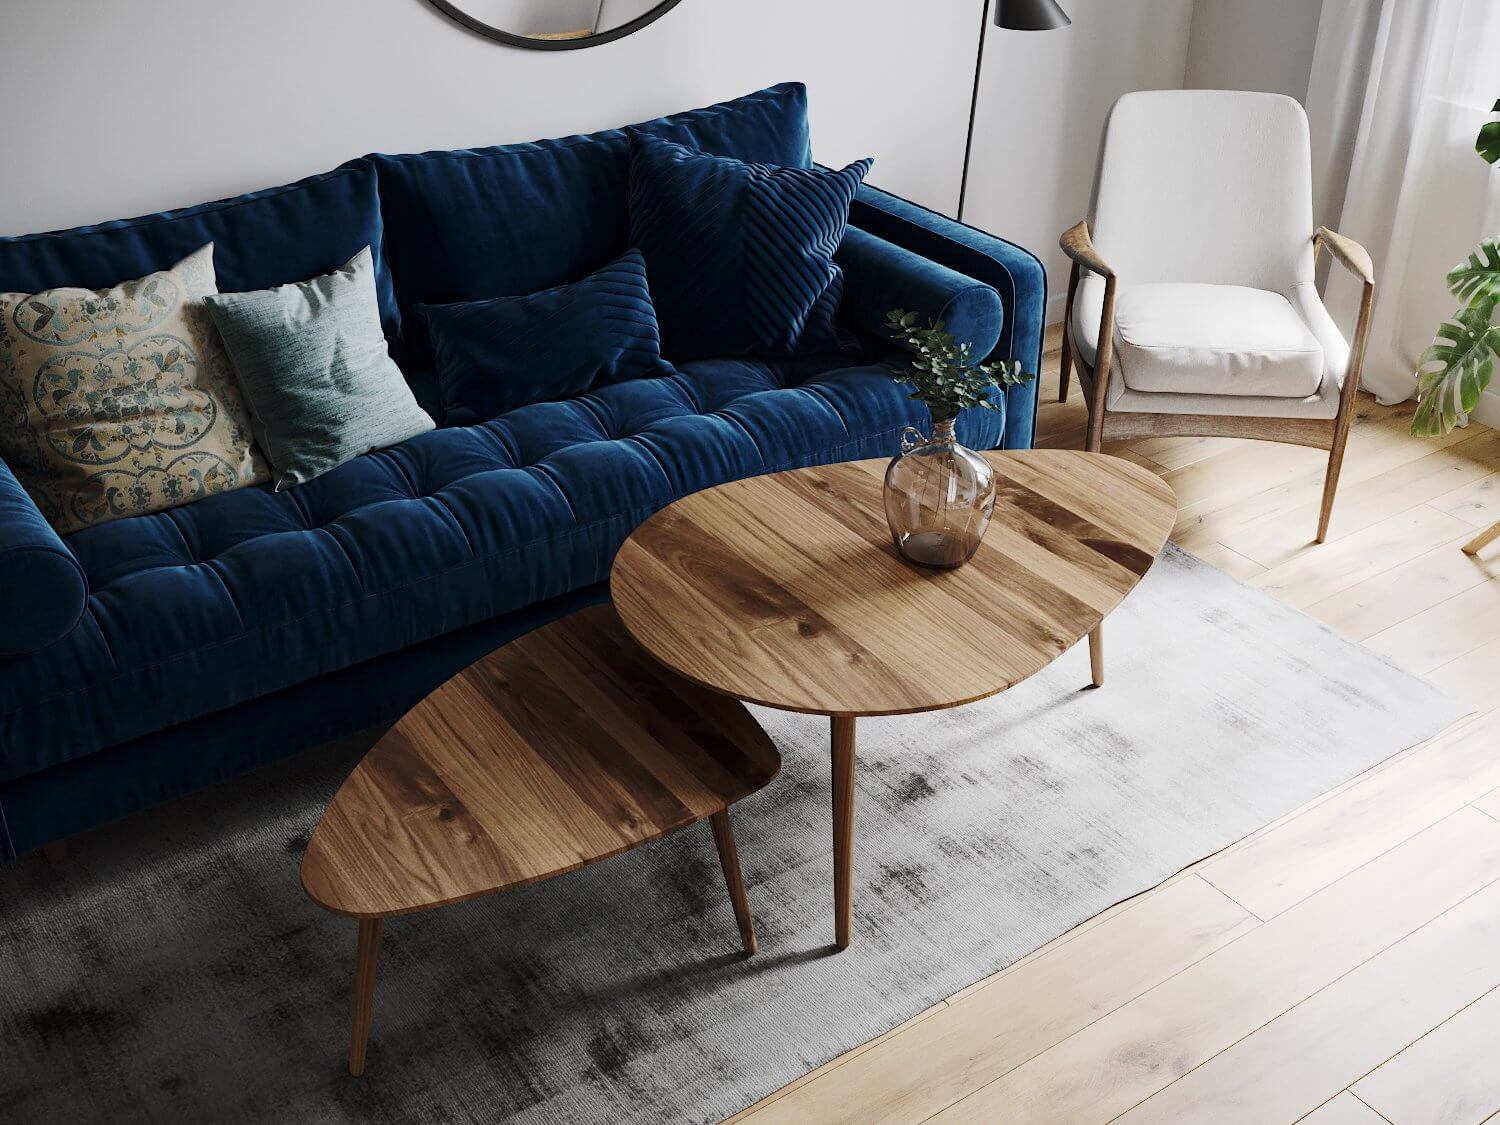 Stylish 72 metres sq. apartment living room blue couch wood side table - cgi visualization